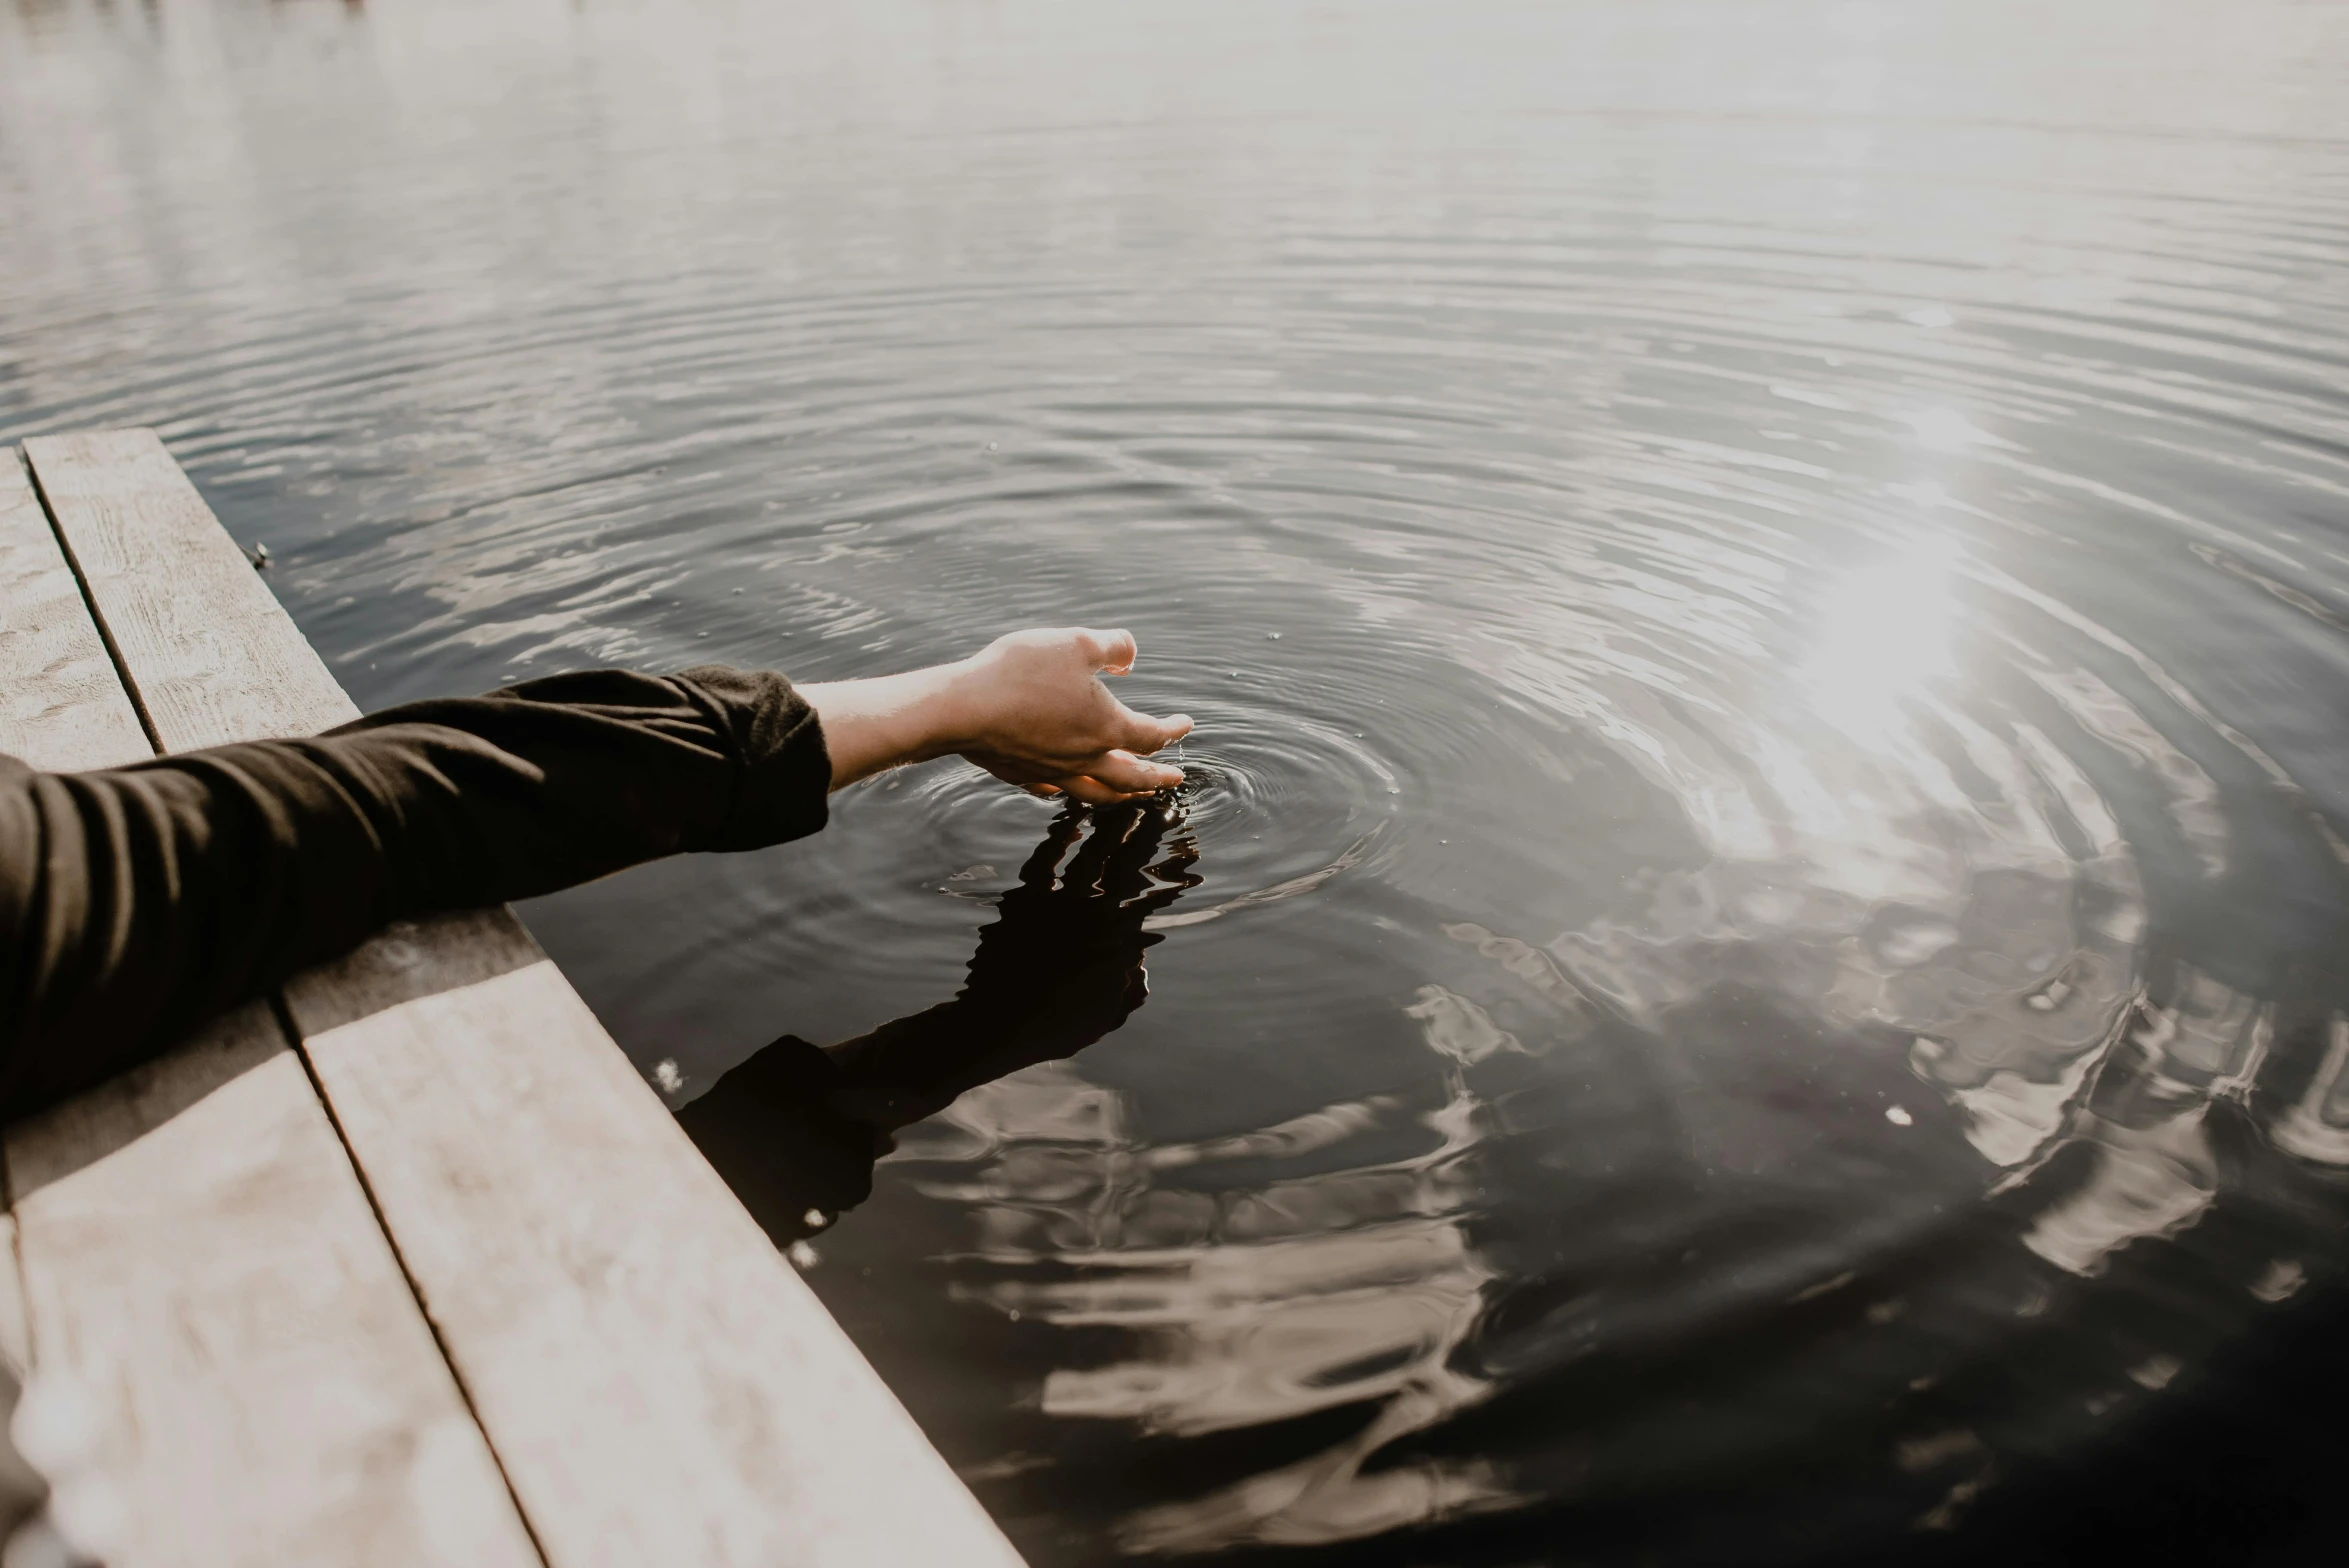 a person standing on a dock next to a body of water, by Emma Andijewska, pexels contest winner, happening, two hands reaching for a fish, water ripples, subtle detailing, floating drowned